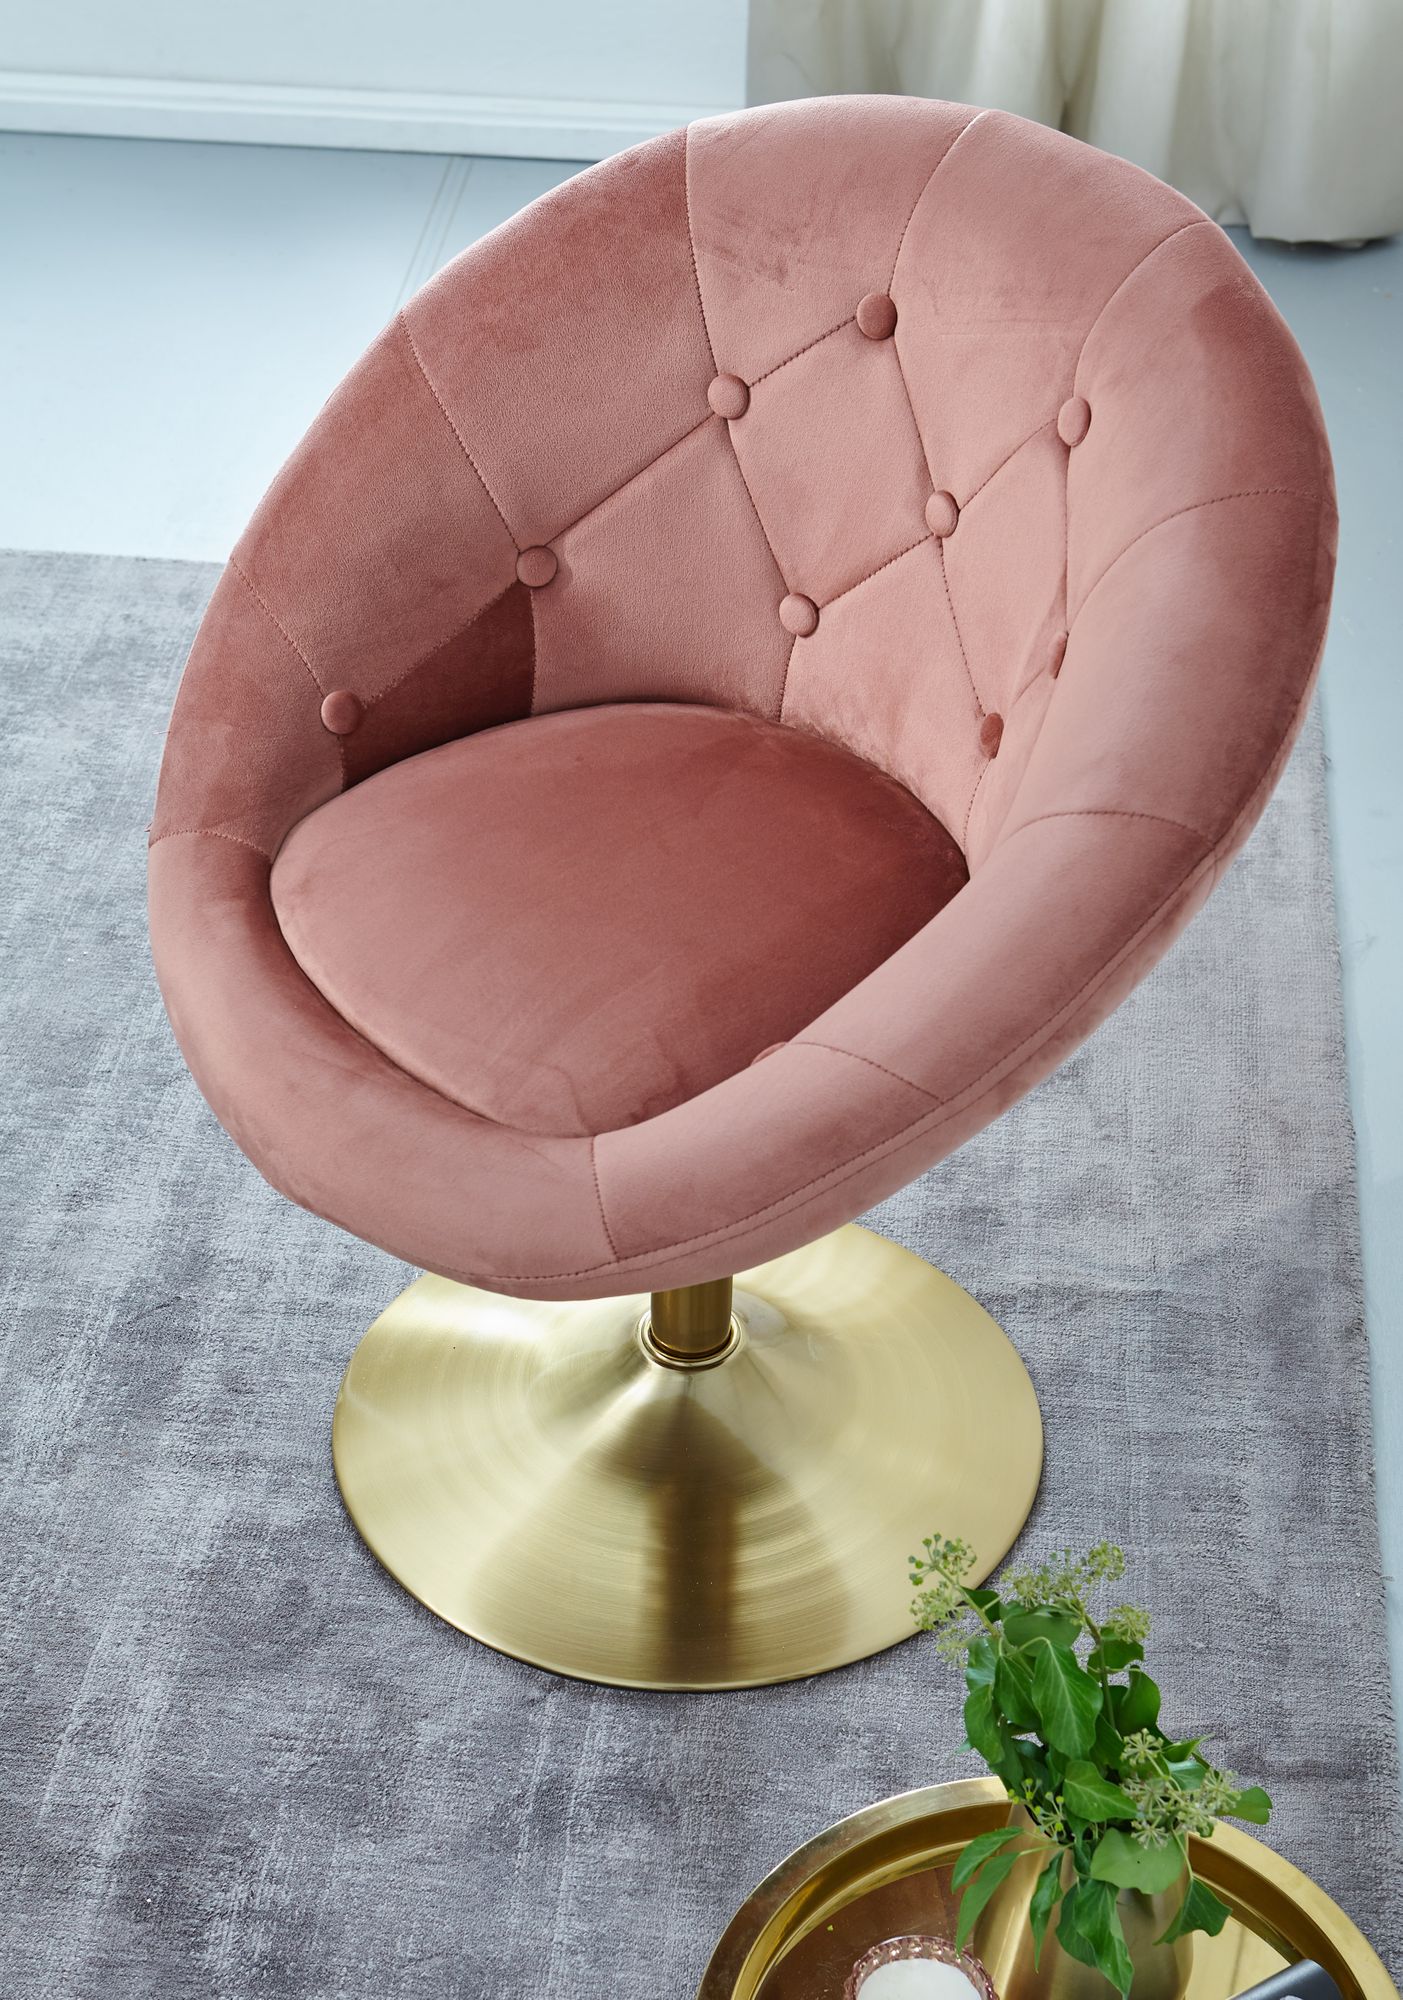 Luxe fauteuil rose